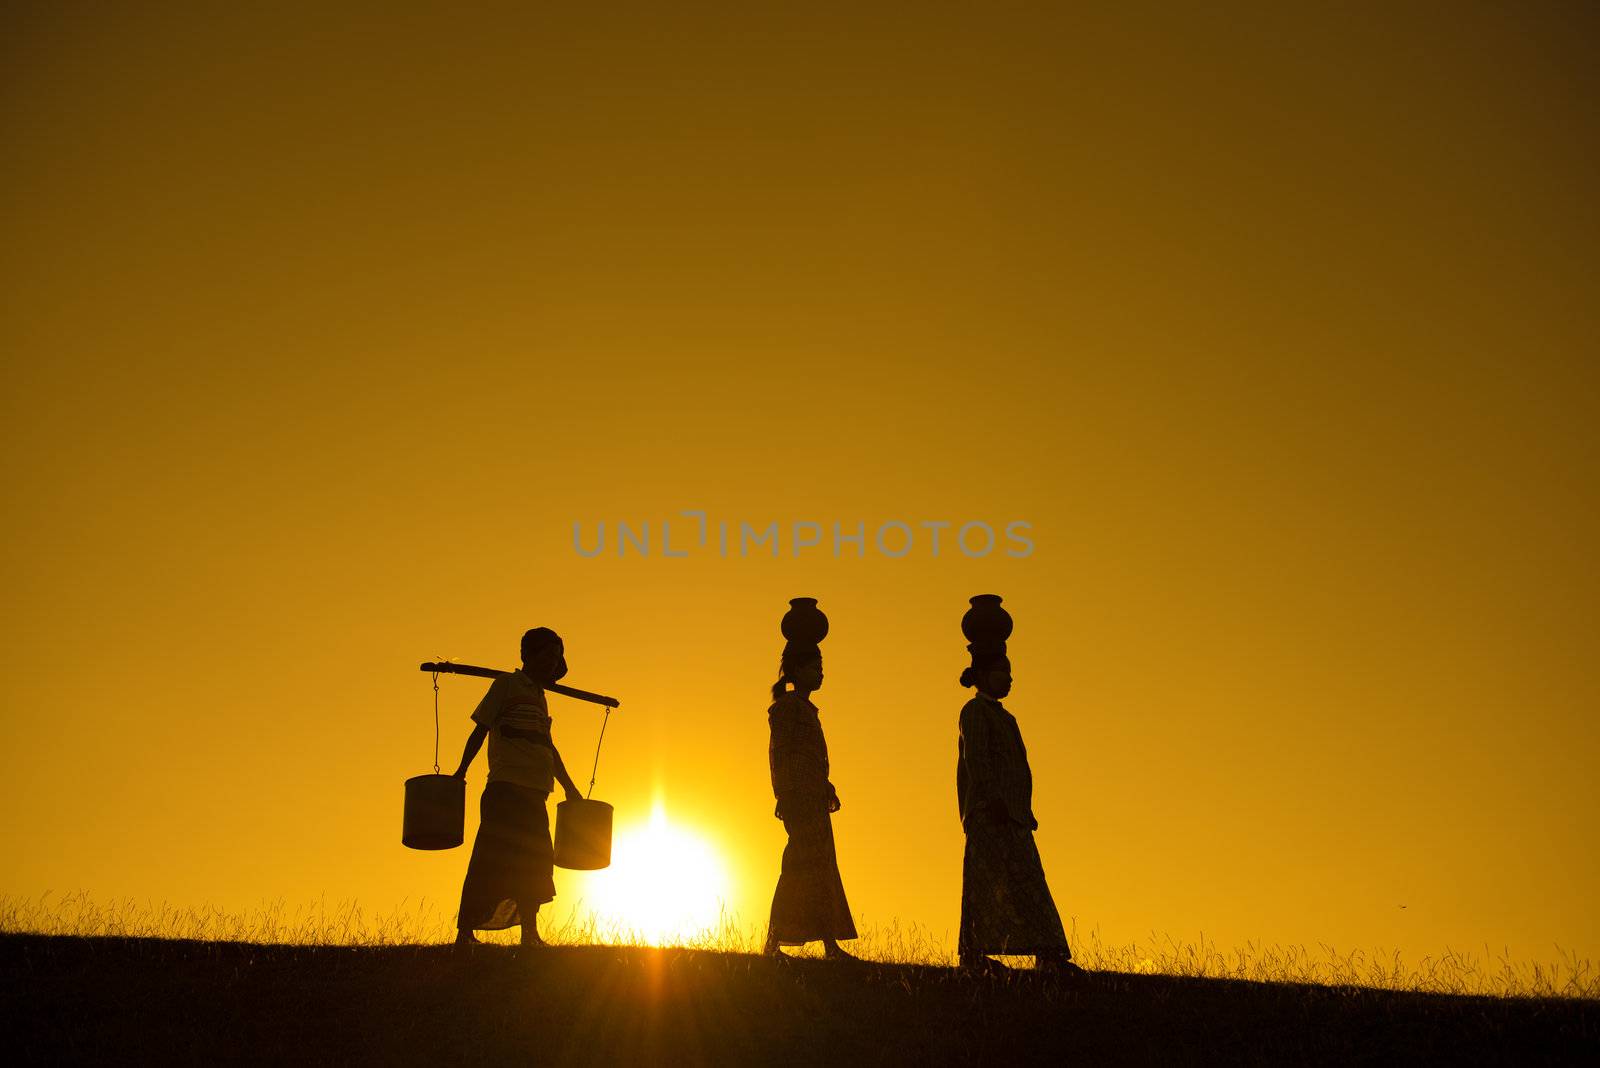 Silhouette of Asian traditional farmers carrying clay pots on head going back home, Bagan, Myanmar